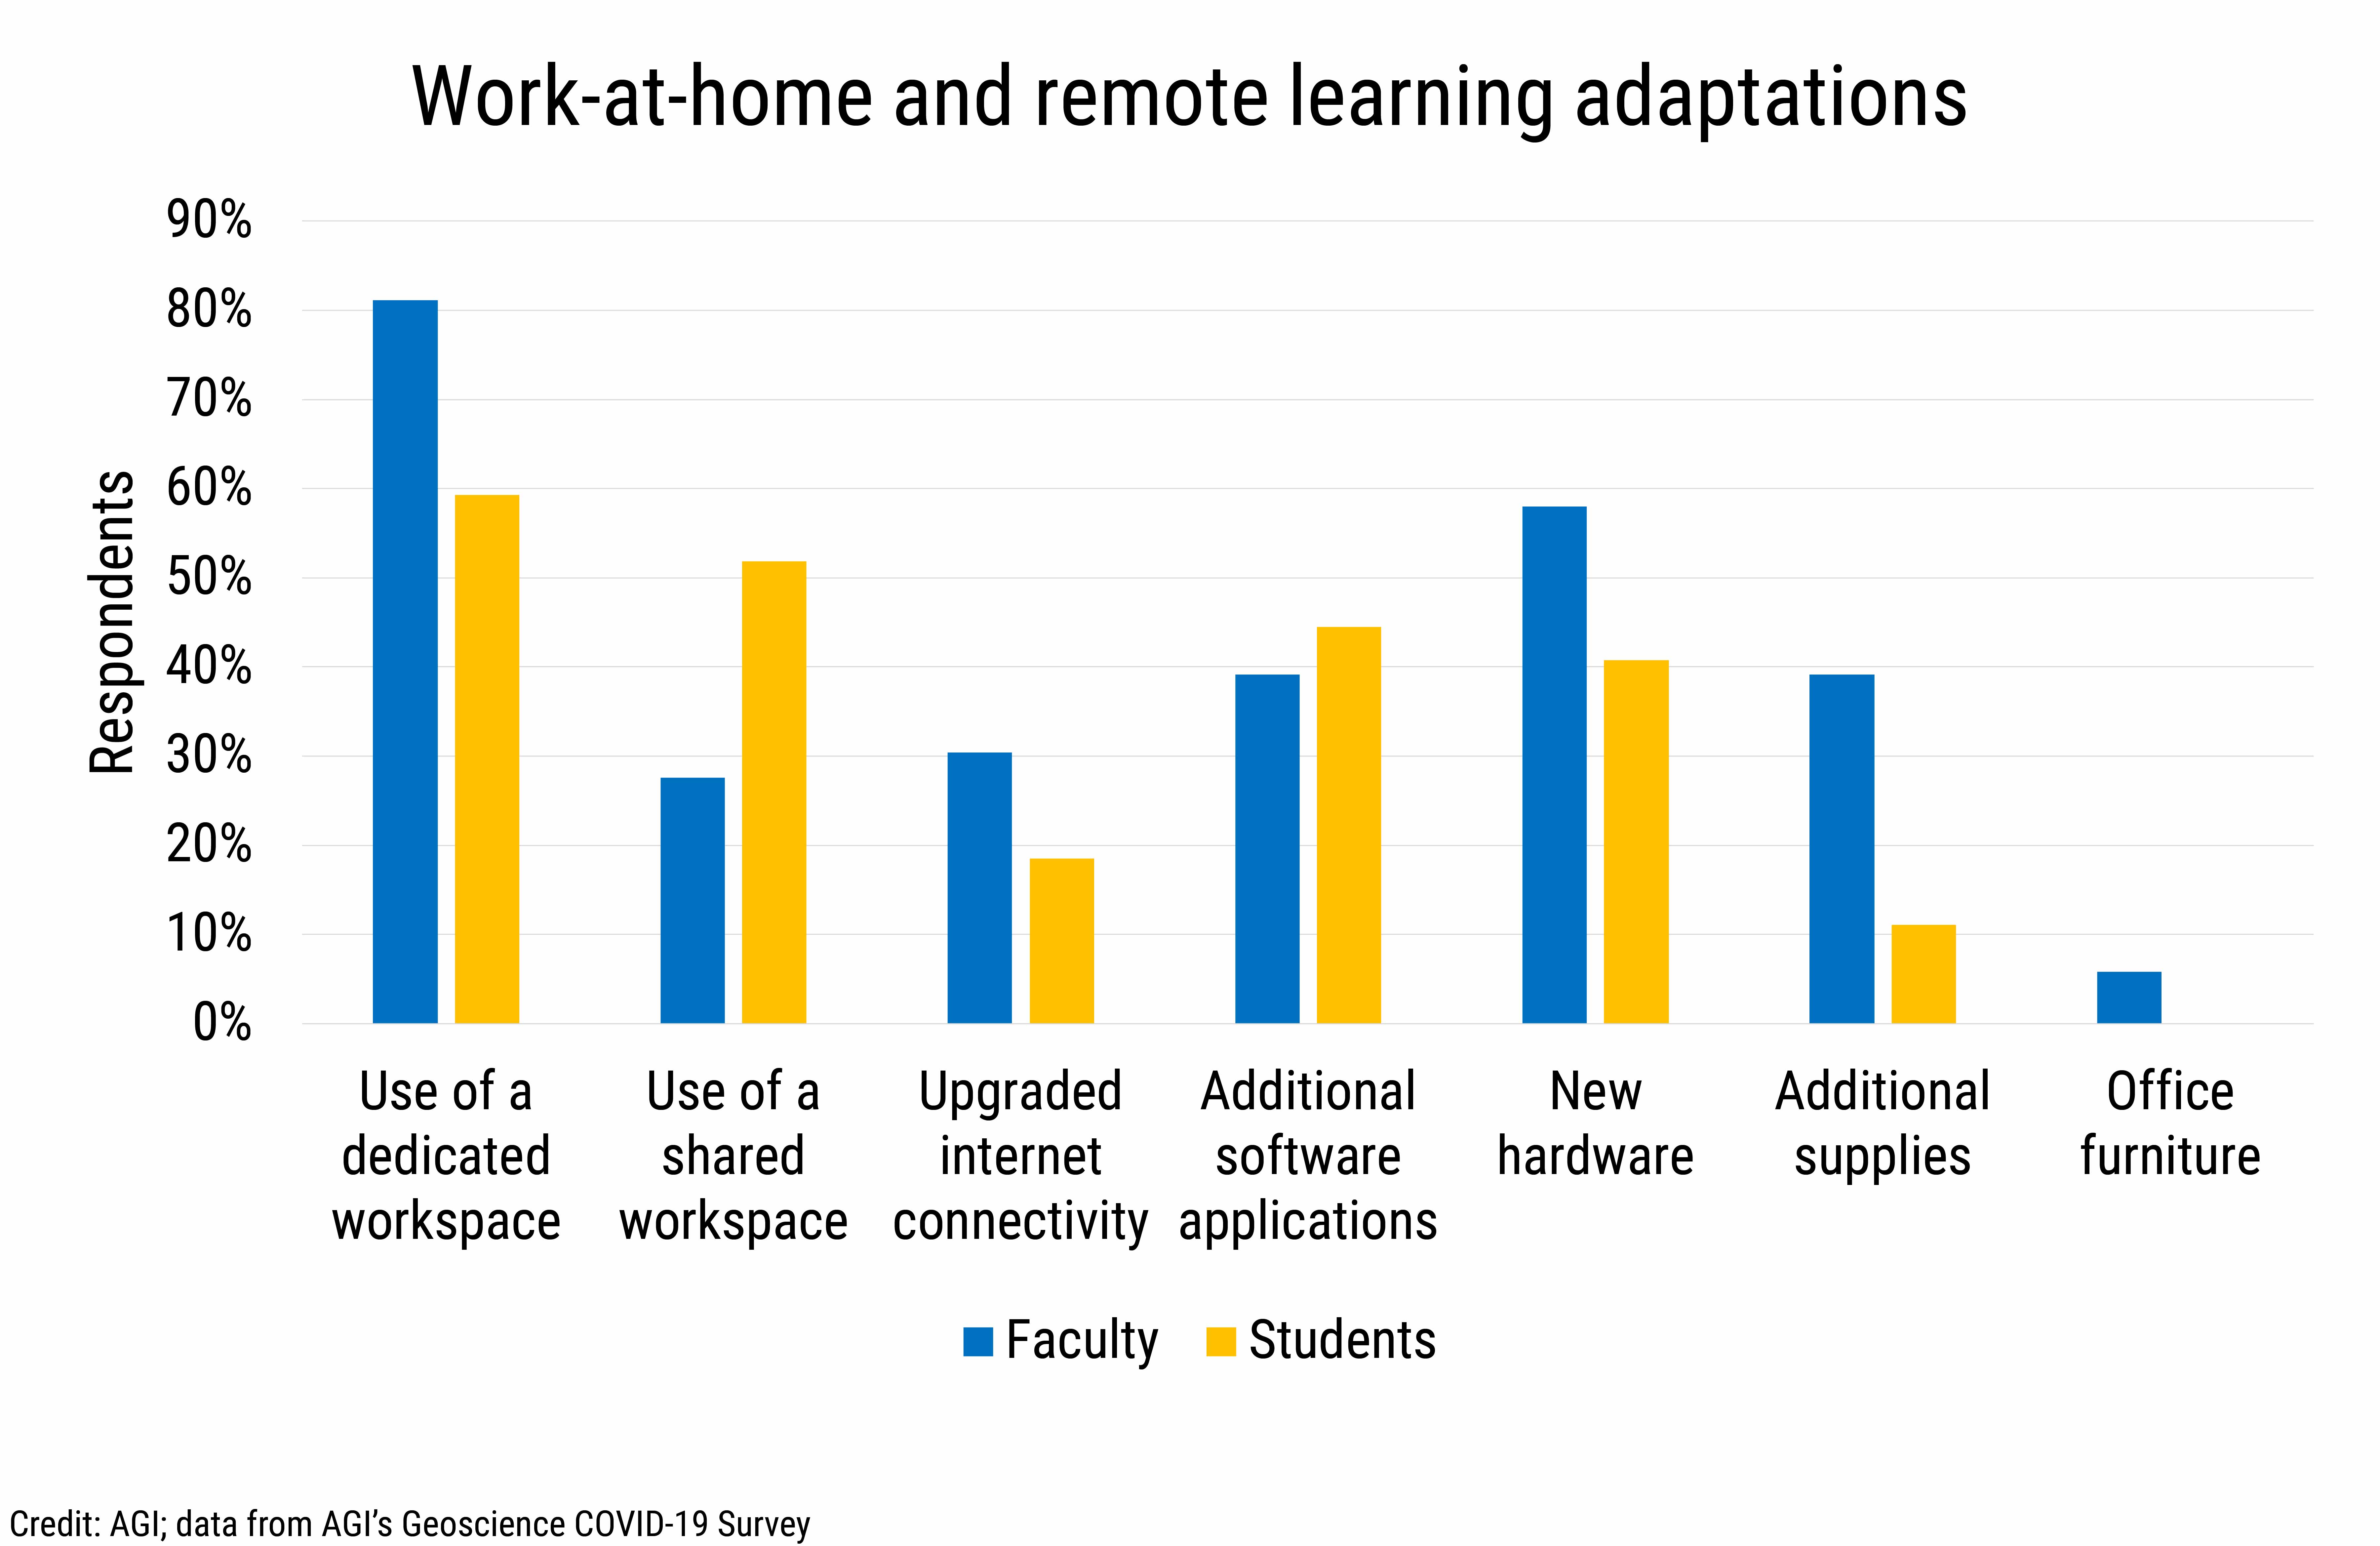 DB_2020-031 chart10 Work-at-home and remote learning adaptations (Credit: AGI; data from AGI's Geoscience COVID-19 Survey)